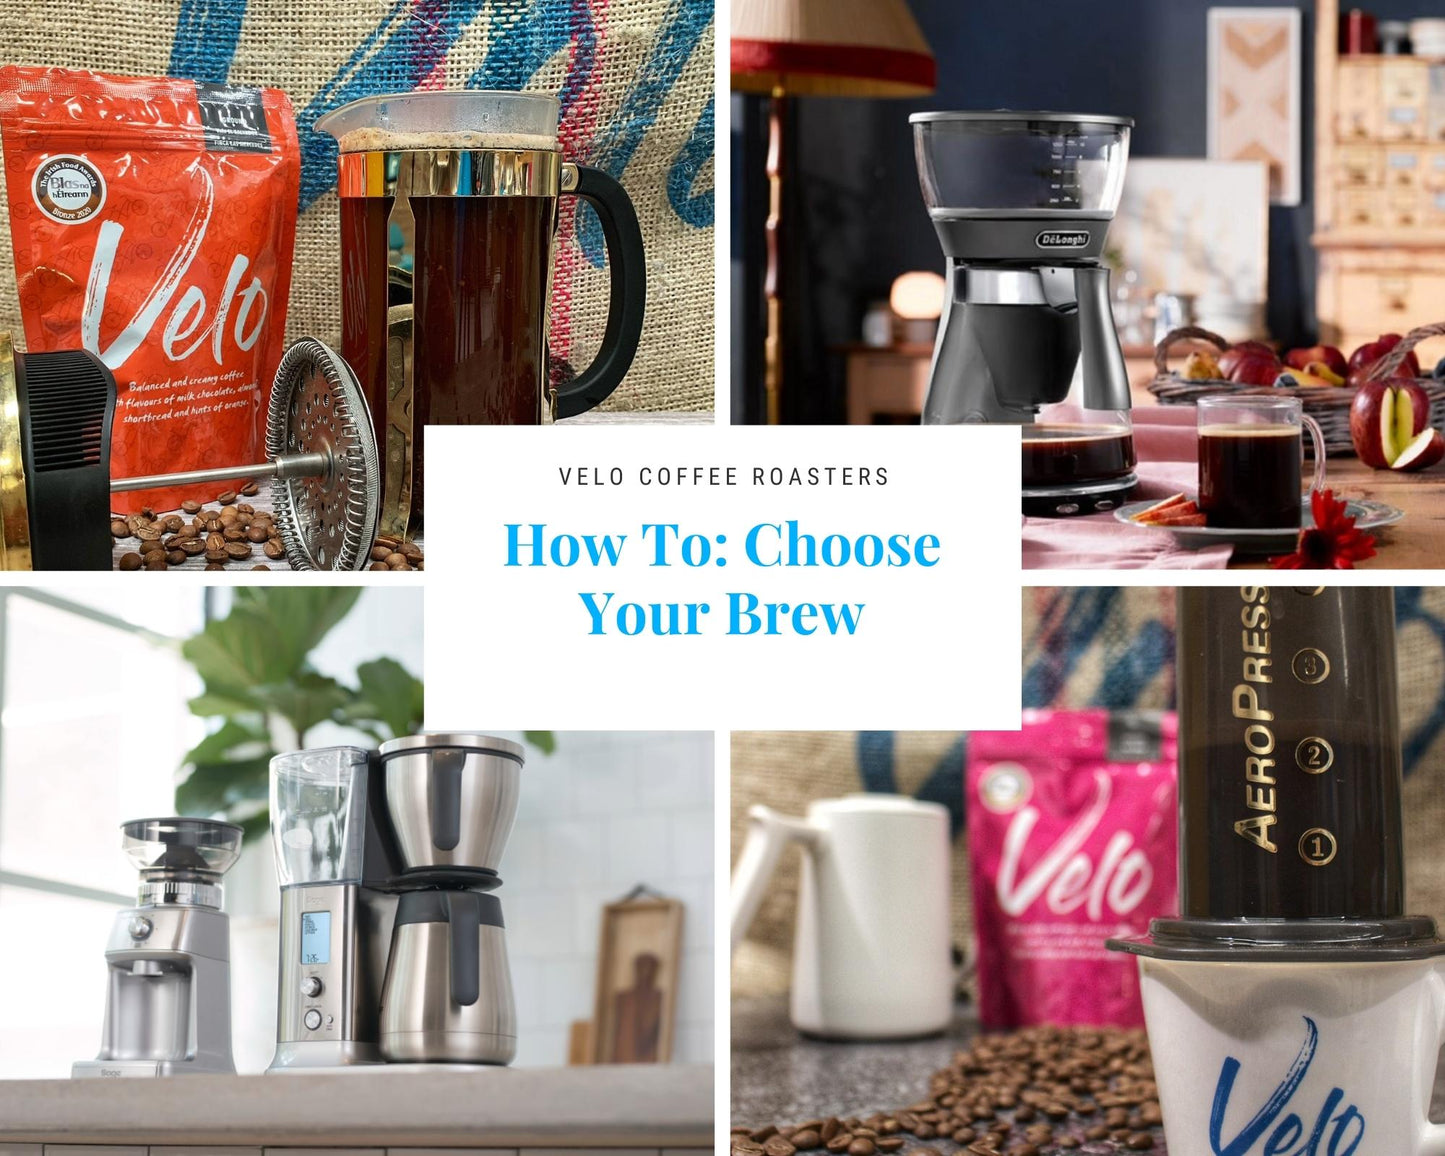 How To: Choose Your Brew - Velo Coffee Roasters